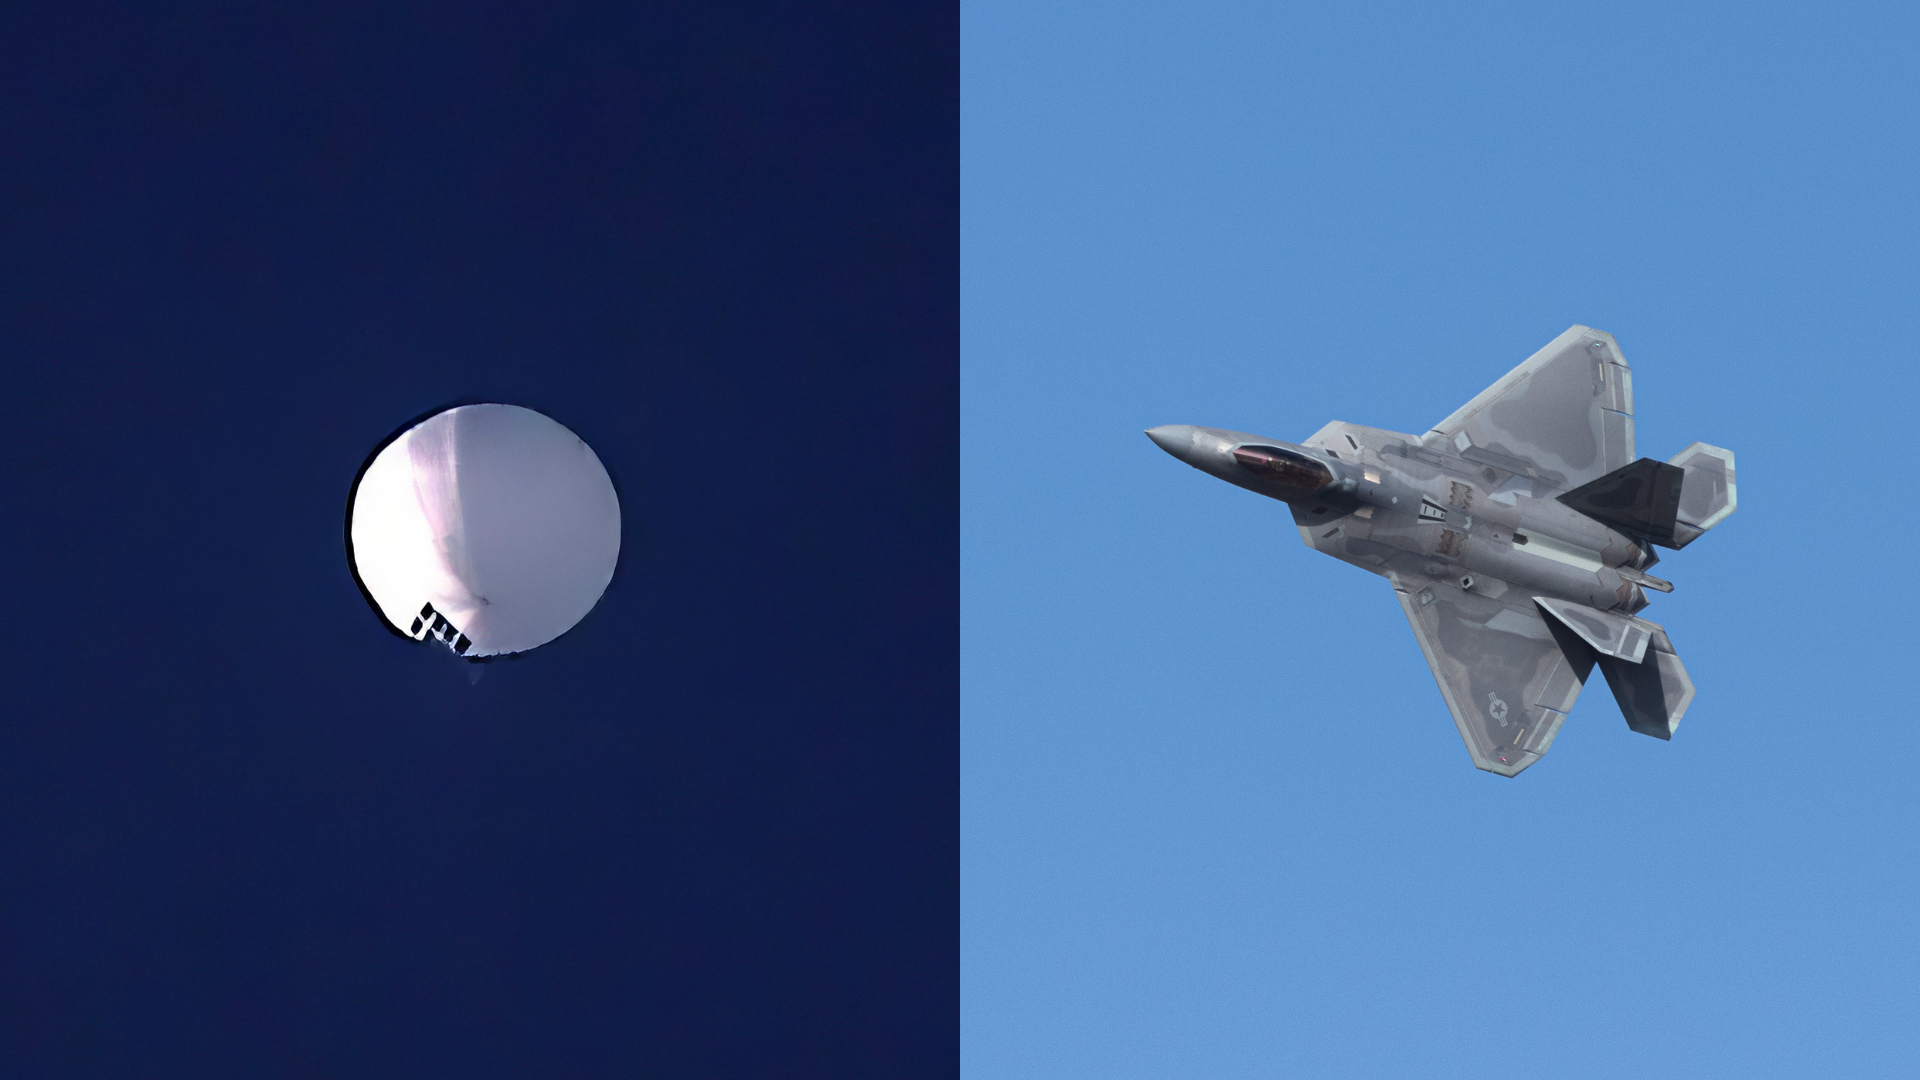 A Us F-22 Fighter Jet Just Shot Down The Chinese Spy Balloon